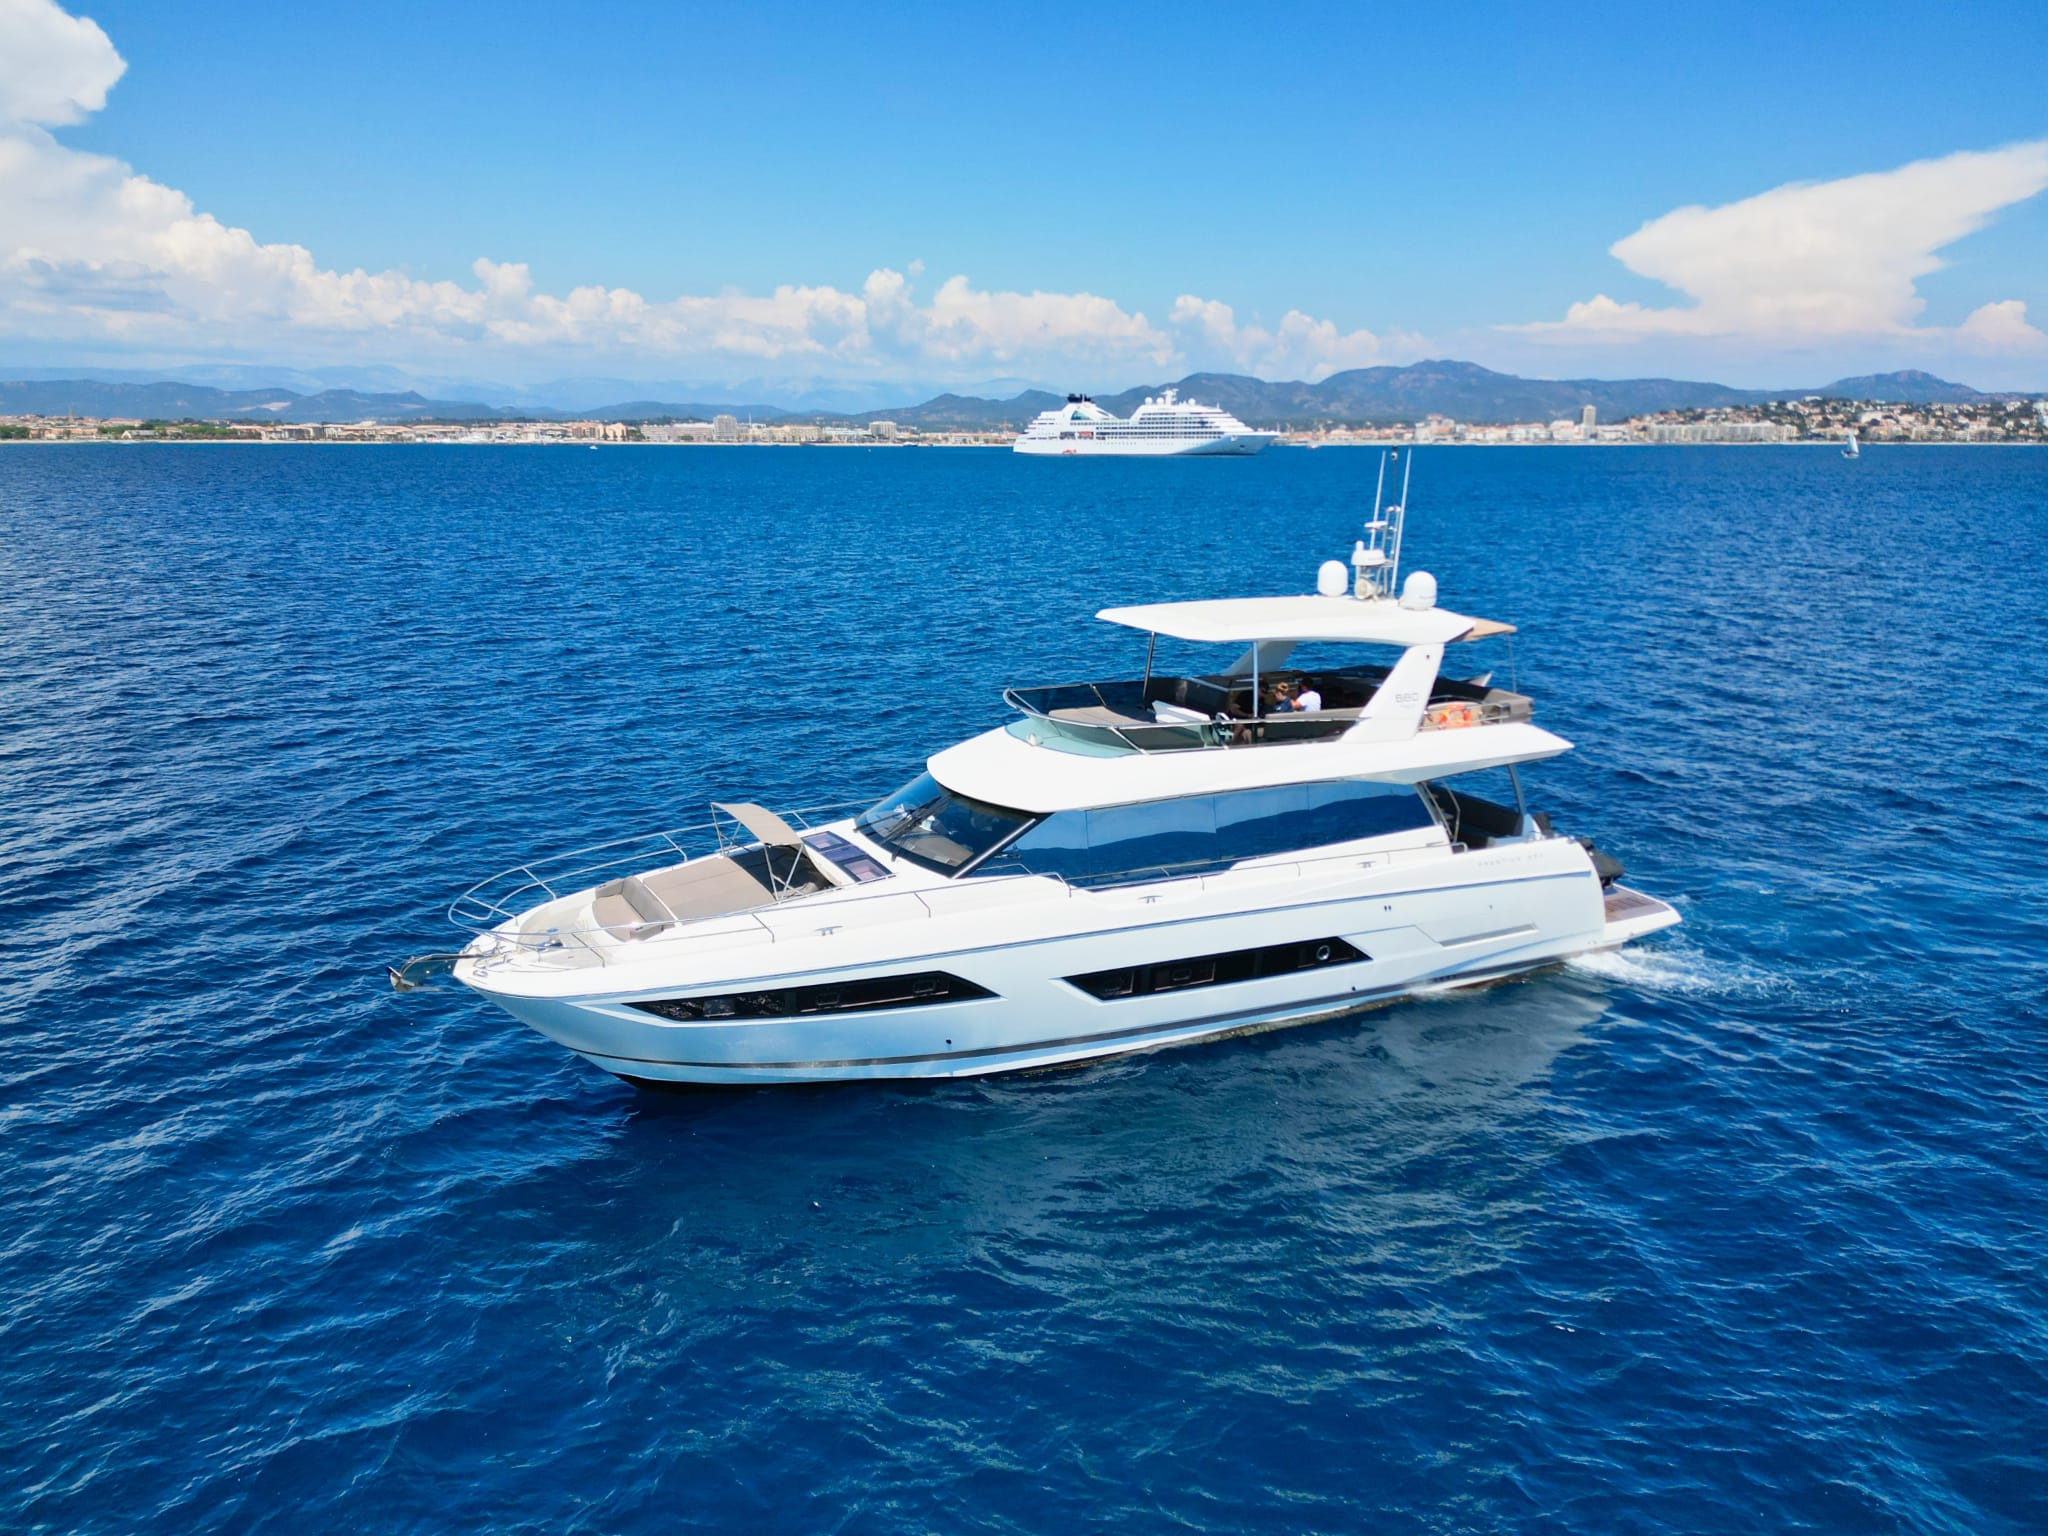 2018 Prestige 680 ‘ ENDLESS SUMMER II’ sold by bY.s